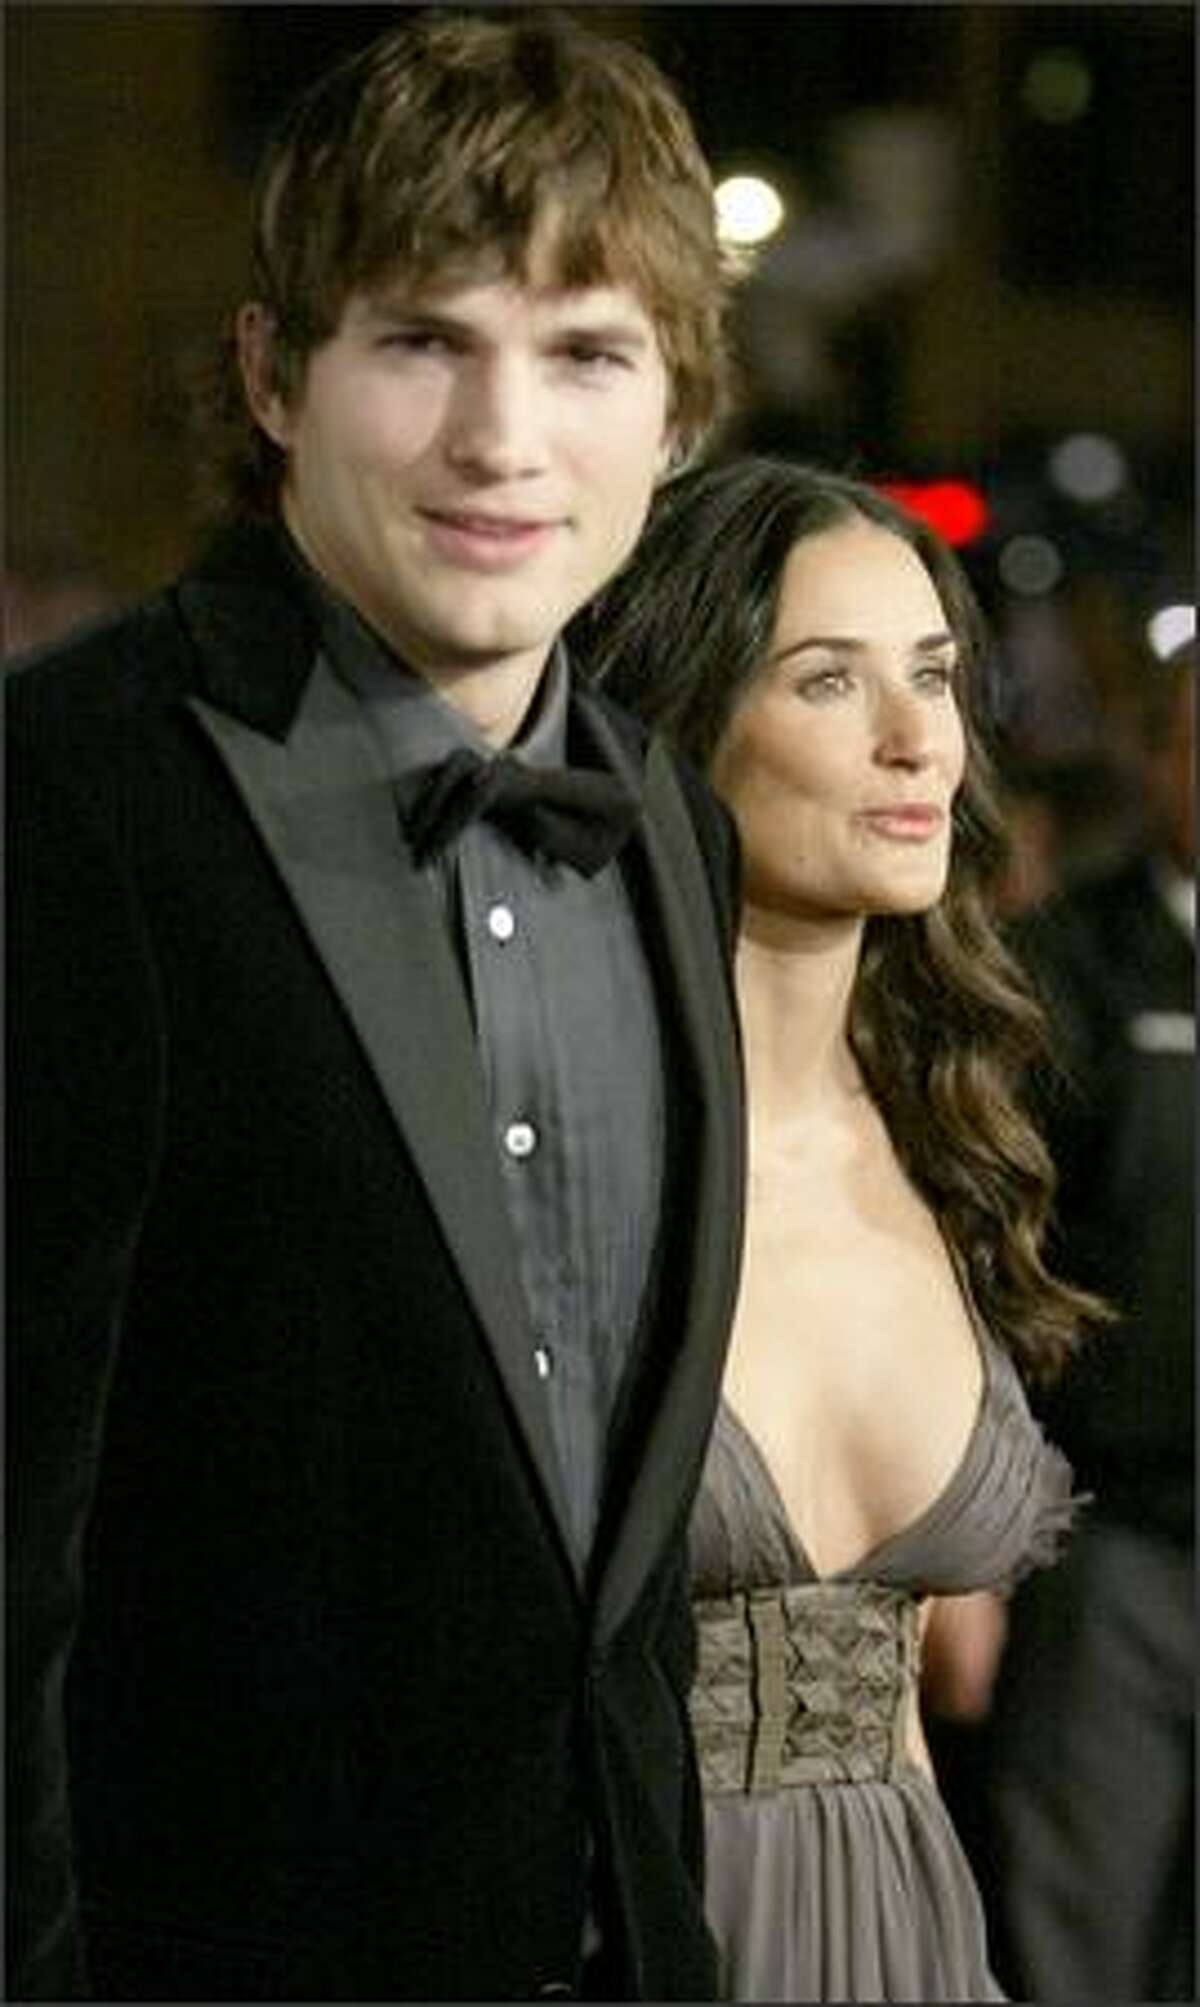 Ashton Kutcher, left, and Demi Moore, right, arrive for the premiere of the movie "Bobby" during the opening night of AFI Fest 2006, Wednesday in Los Angeles. (AP Photo/Danny Moloshok)